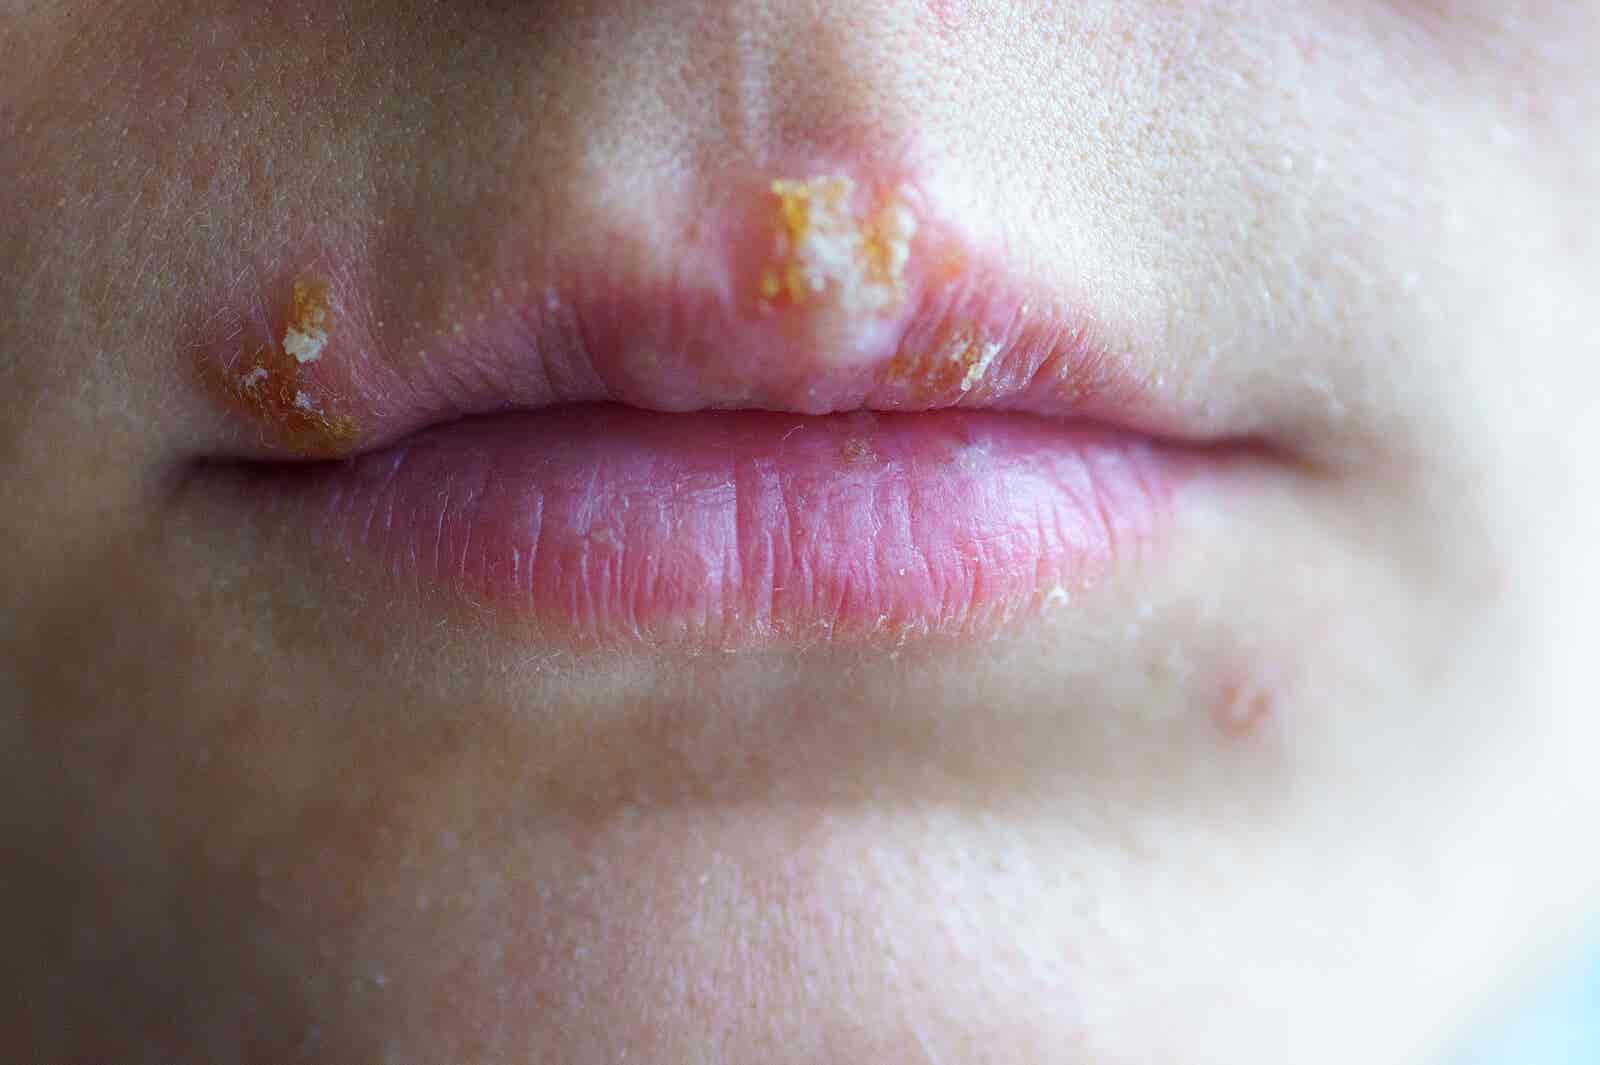 Herpes on the lips.